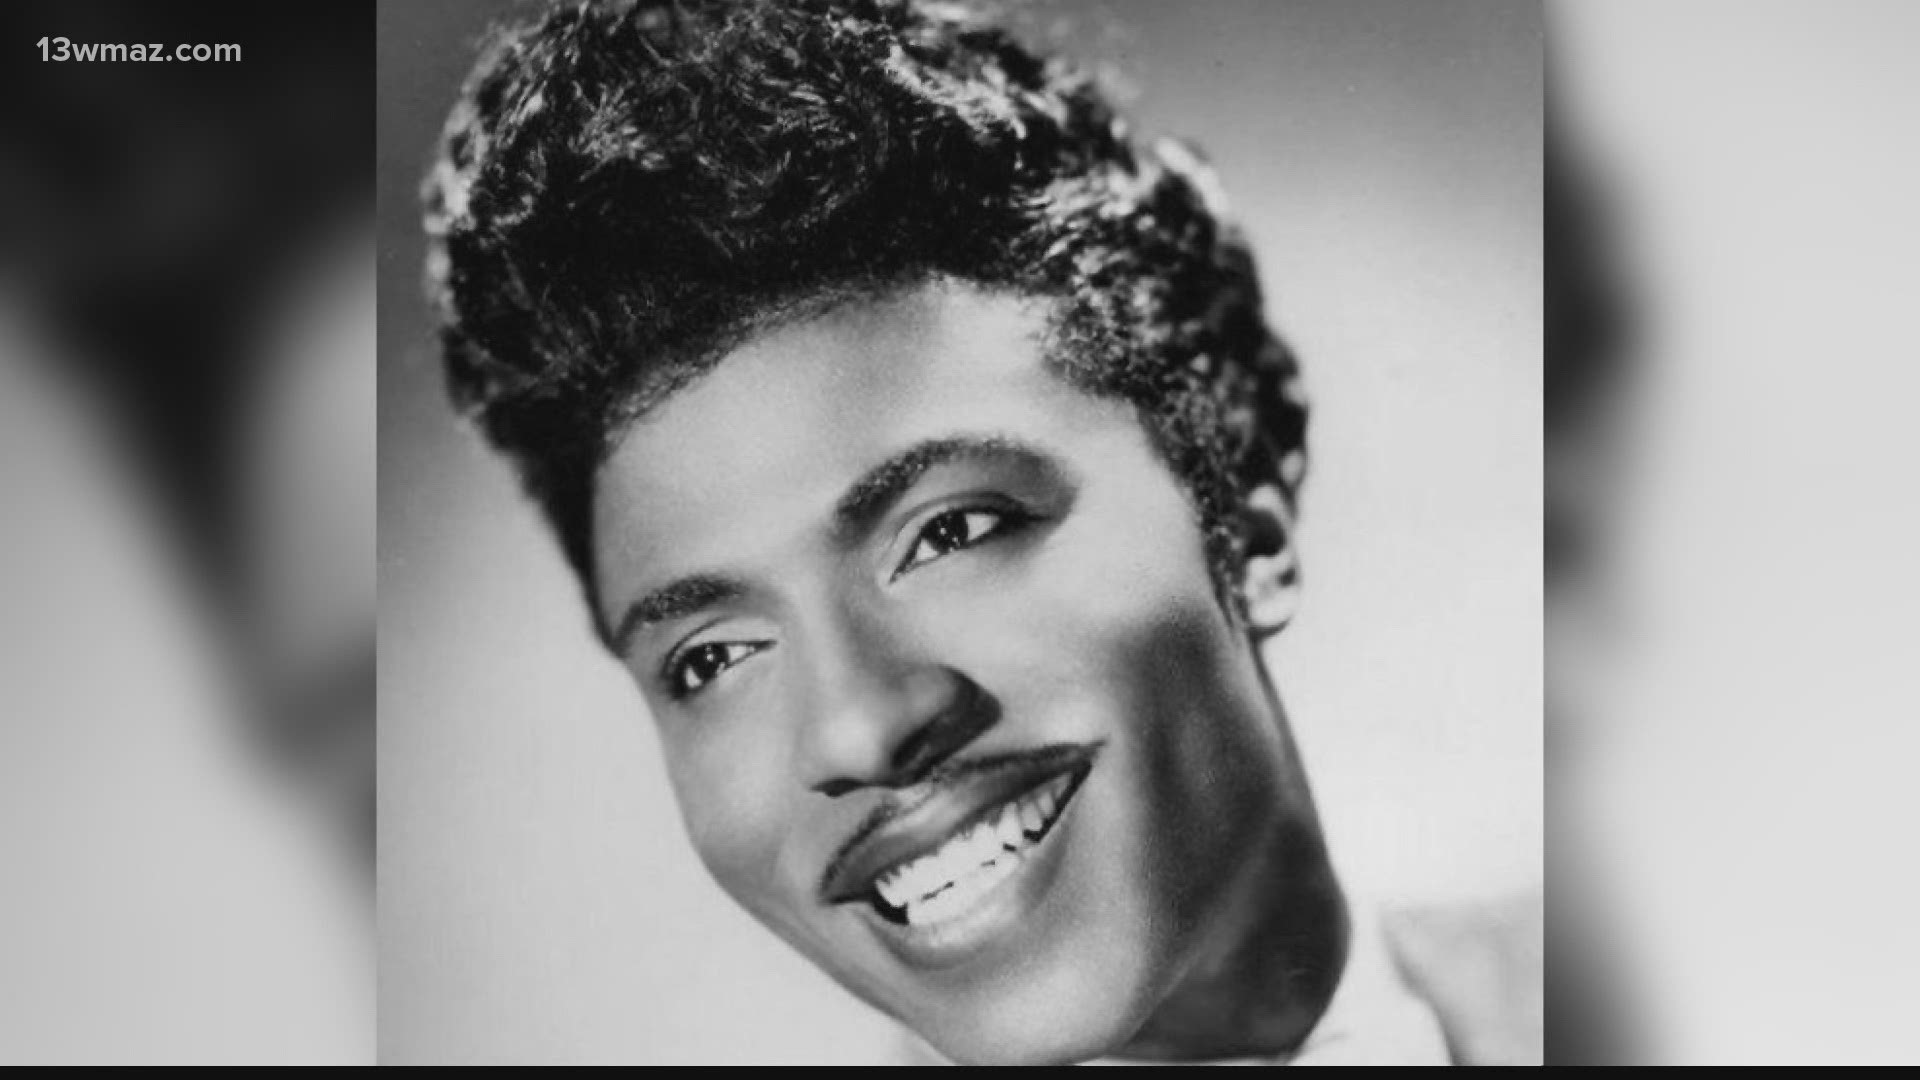 This Sunday marks a year since the death of Little Richard. There will be a celebration at Rosa Parks Square with festivities fun and food, and that's not all